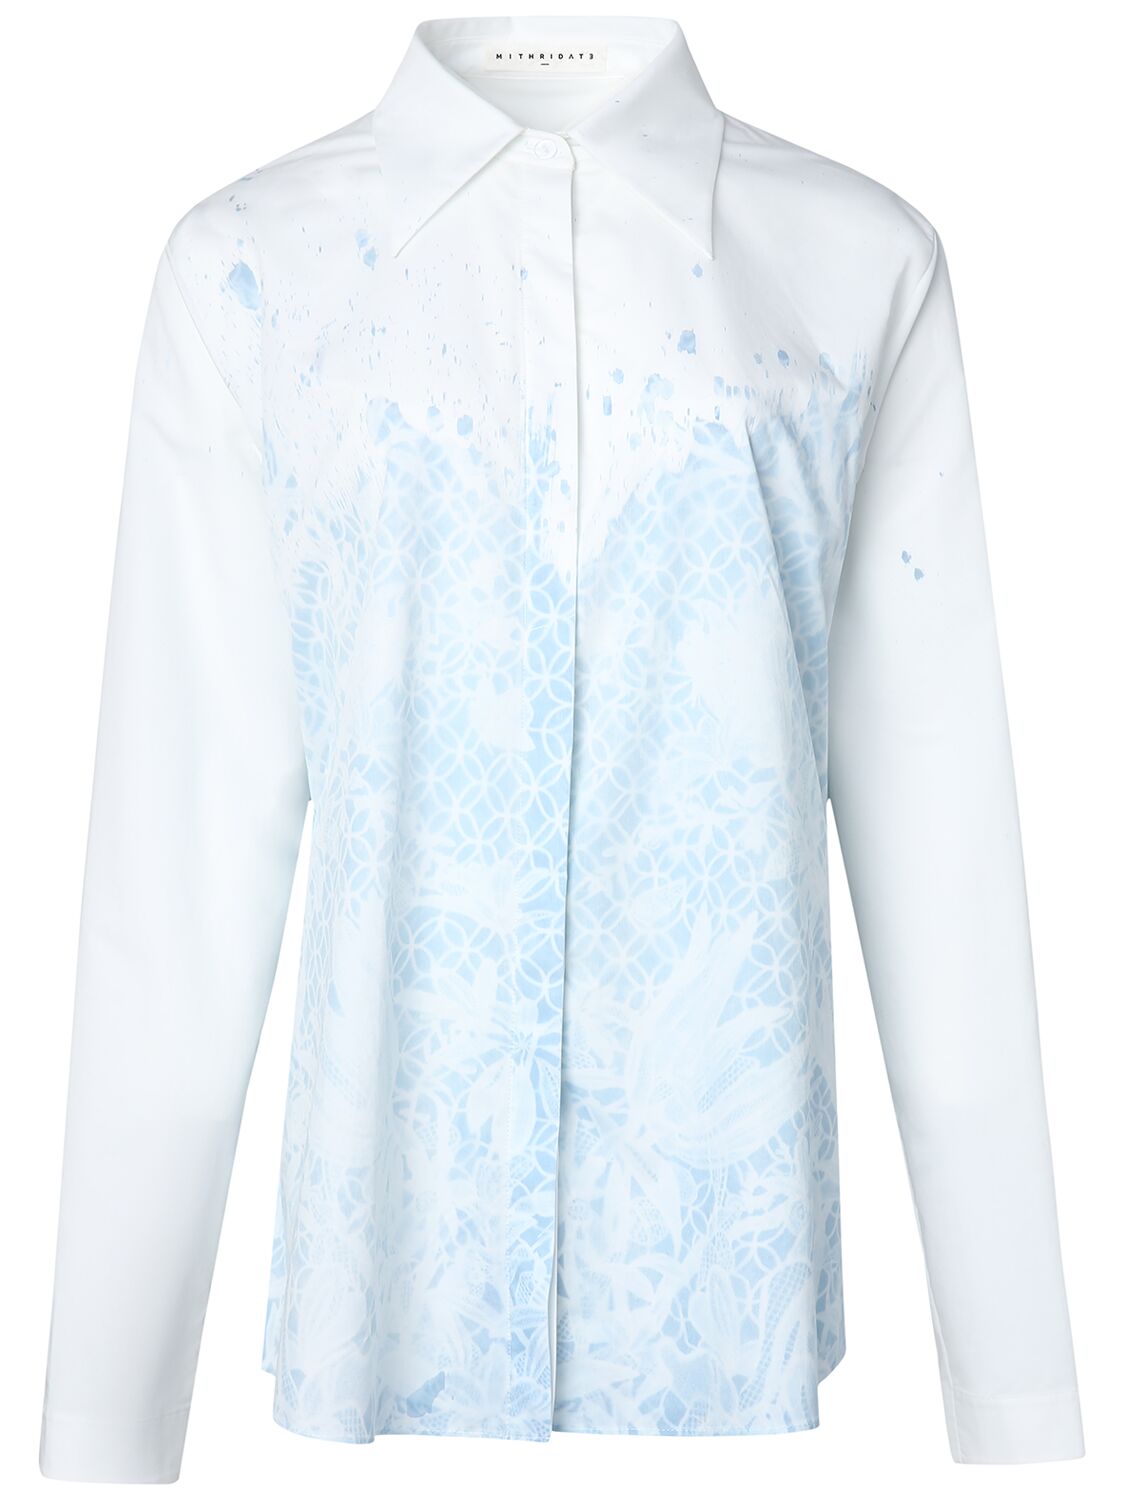 Mithridate Printed Shirt In White,blue